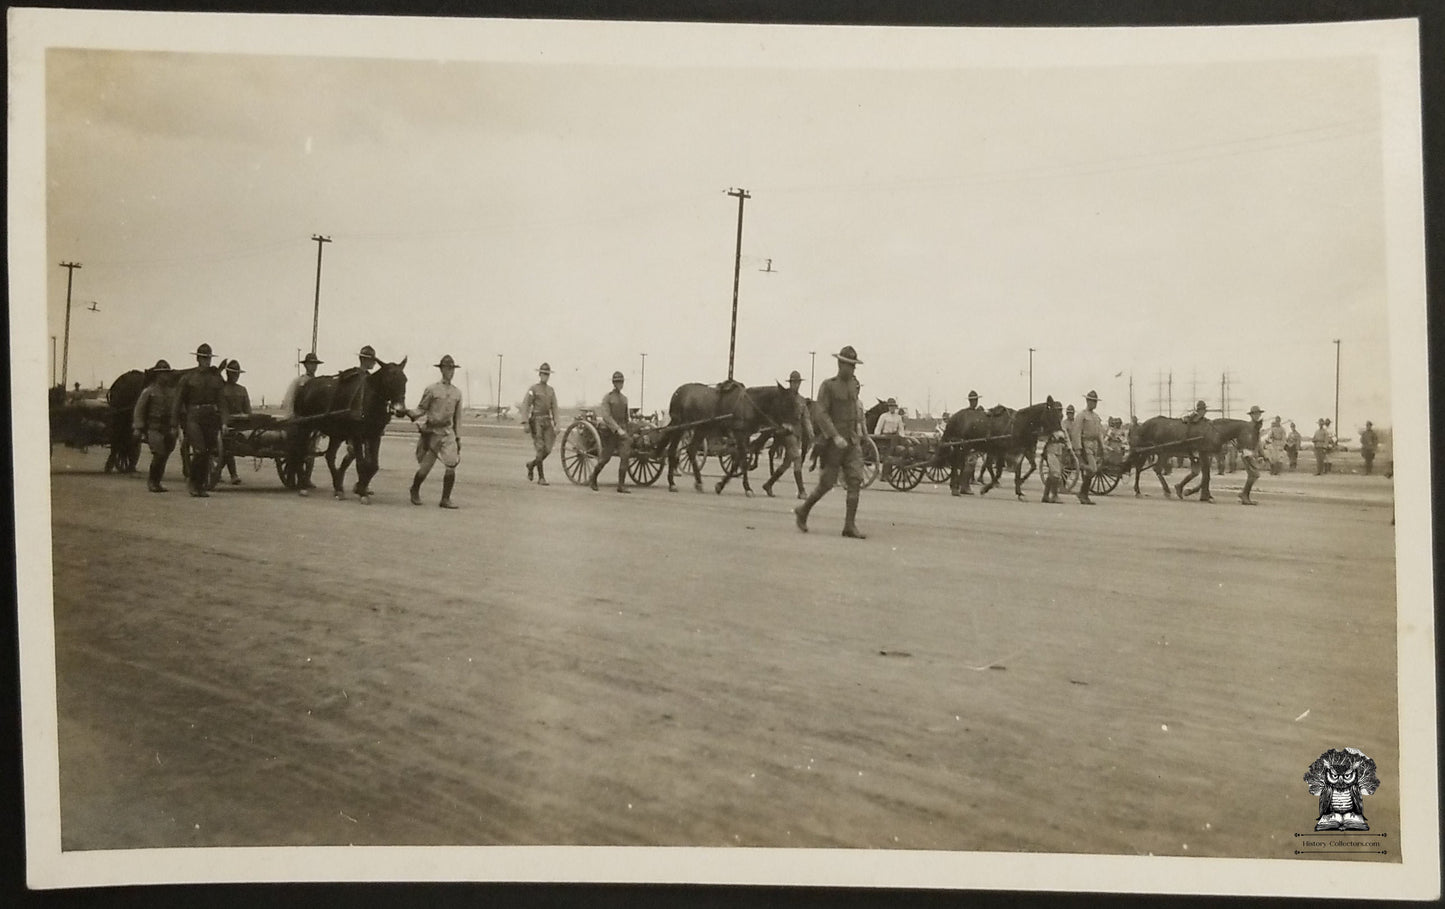 c1918 RPPC Picture Postcard - Post WWI US Army Calvary Artillery Supply Wagon March Naval Military Transit Port - AZO Stamp Box